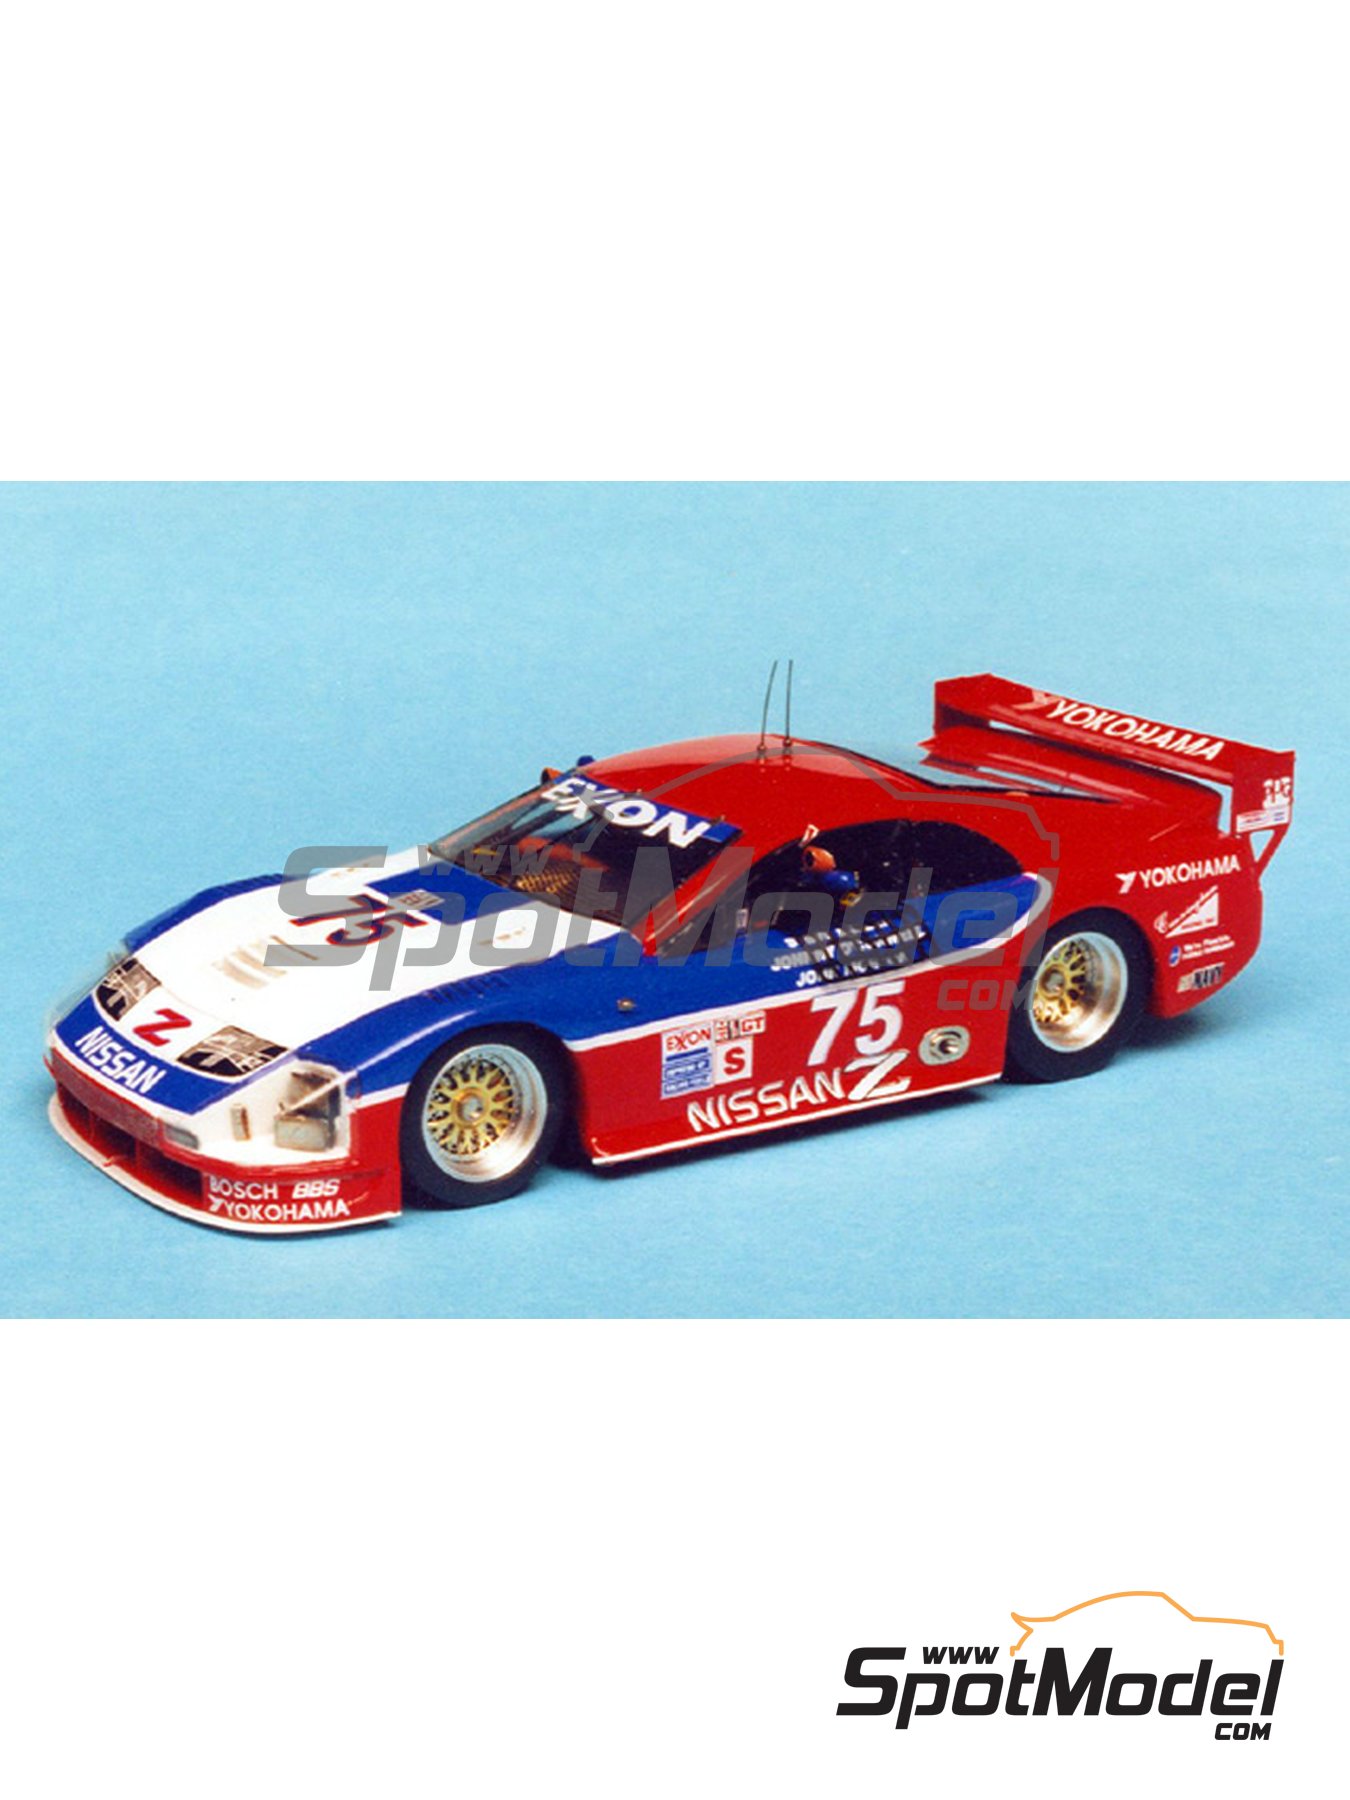 Nissan 300ZX IMSA - Sebring 1994. Car scale model kit in 1/43 scale  manufactured by Renaissance Models (ref. 009D)